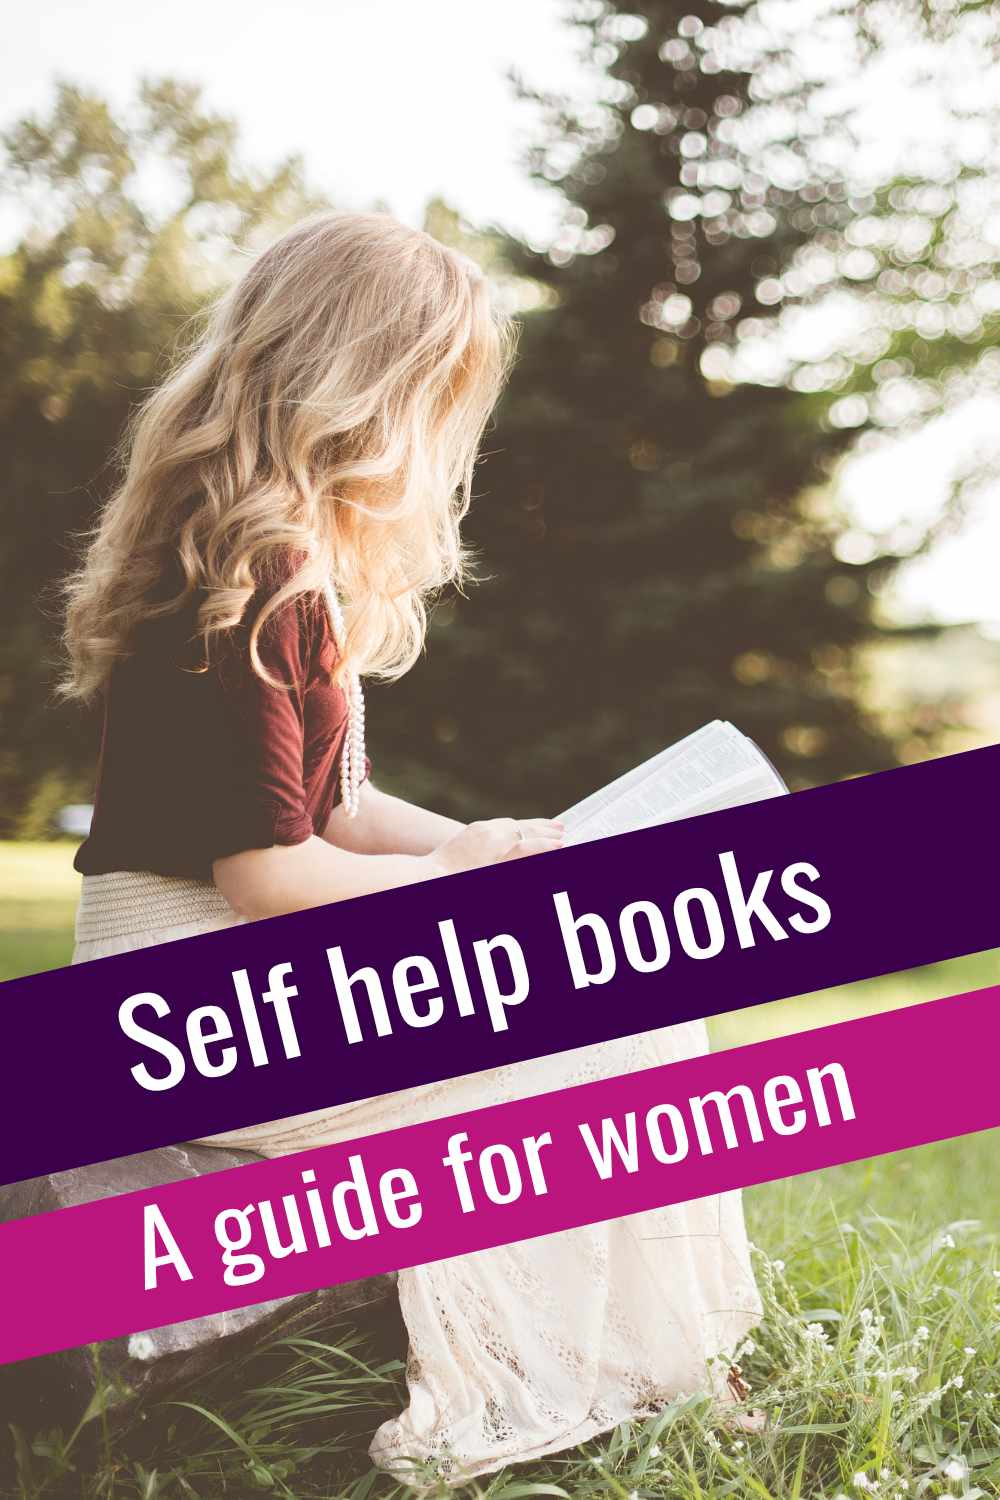 social media image that says self help books, a guide for women